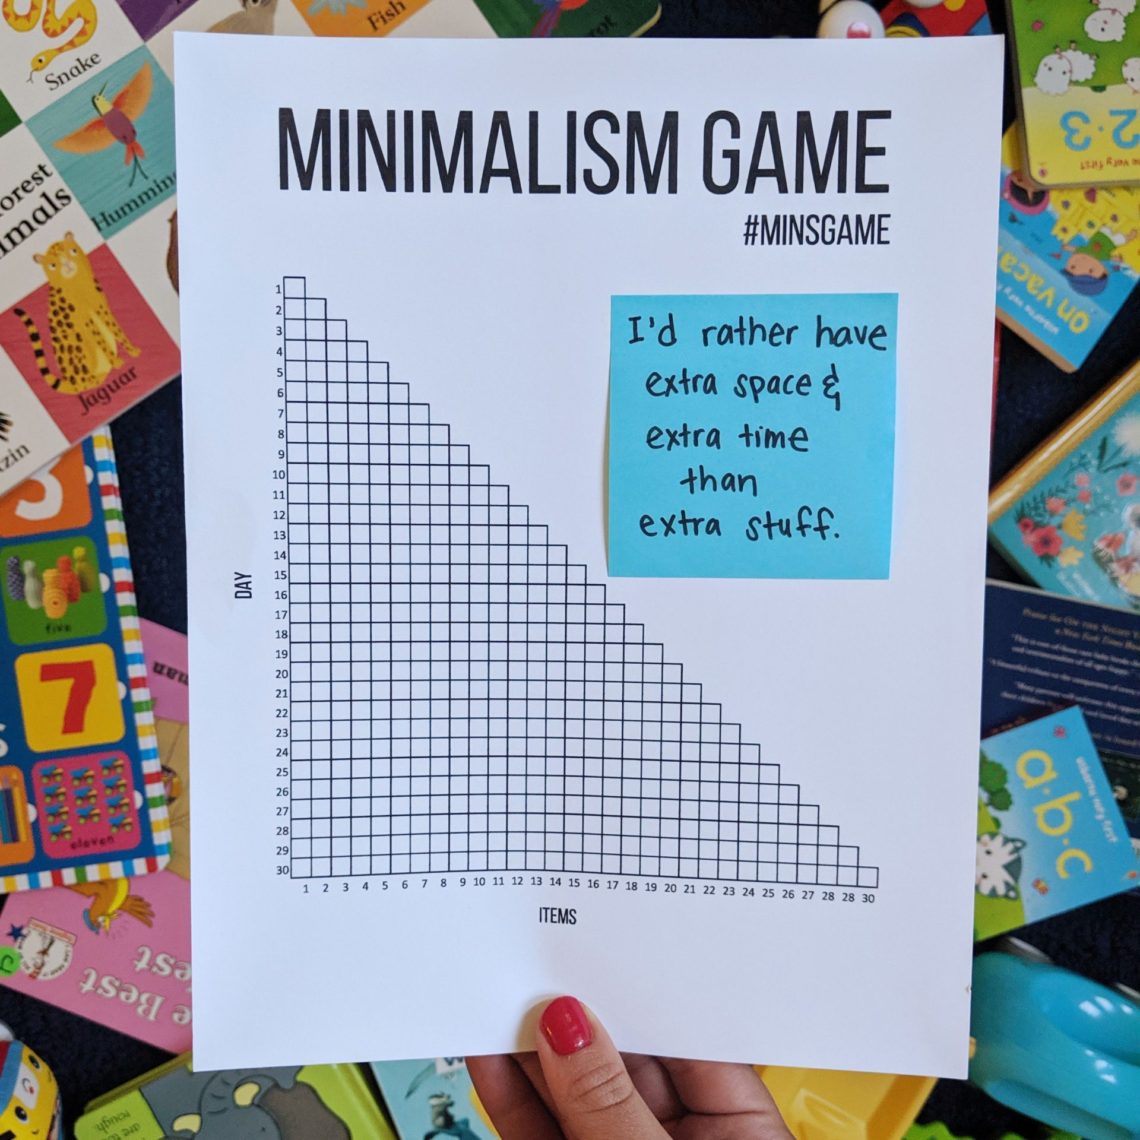 The Minimalist Game Printable (minsgame) Let's Live and Learn